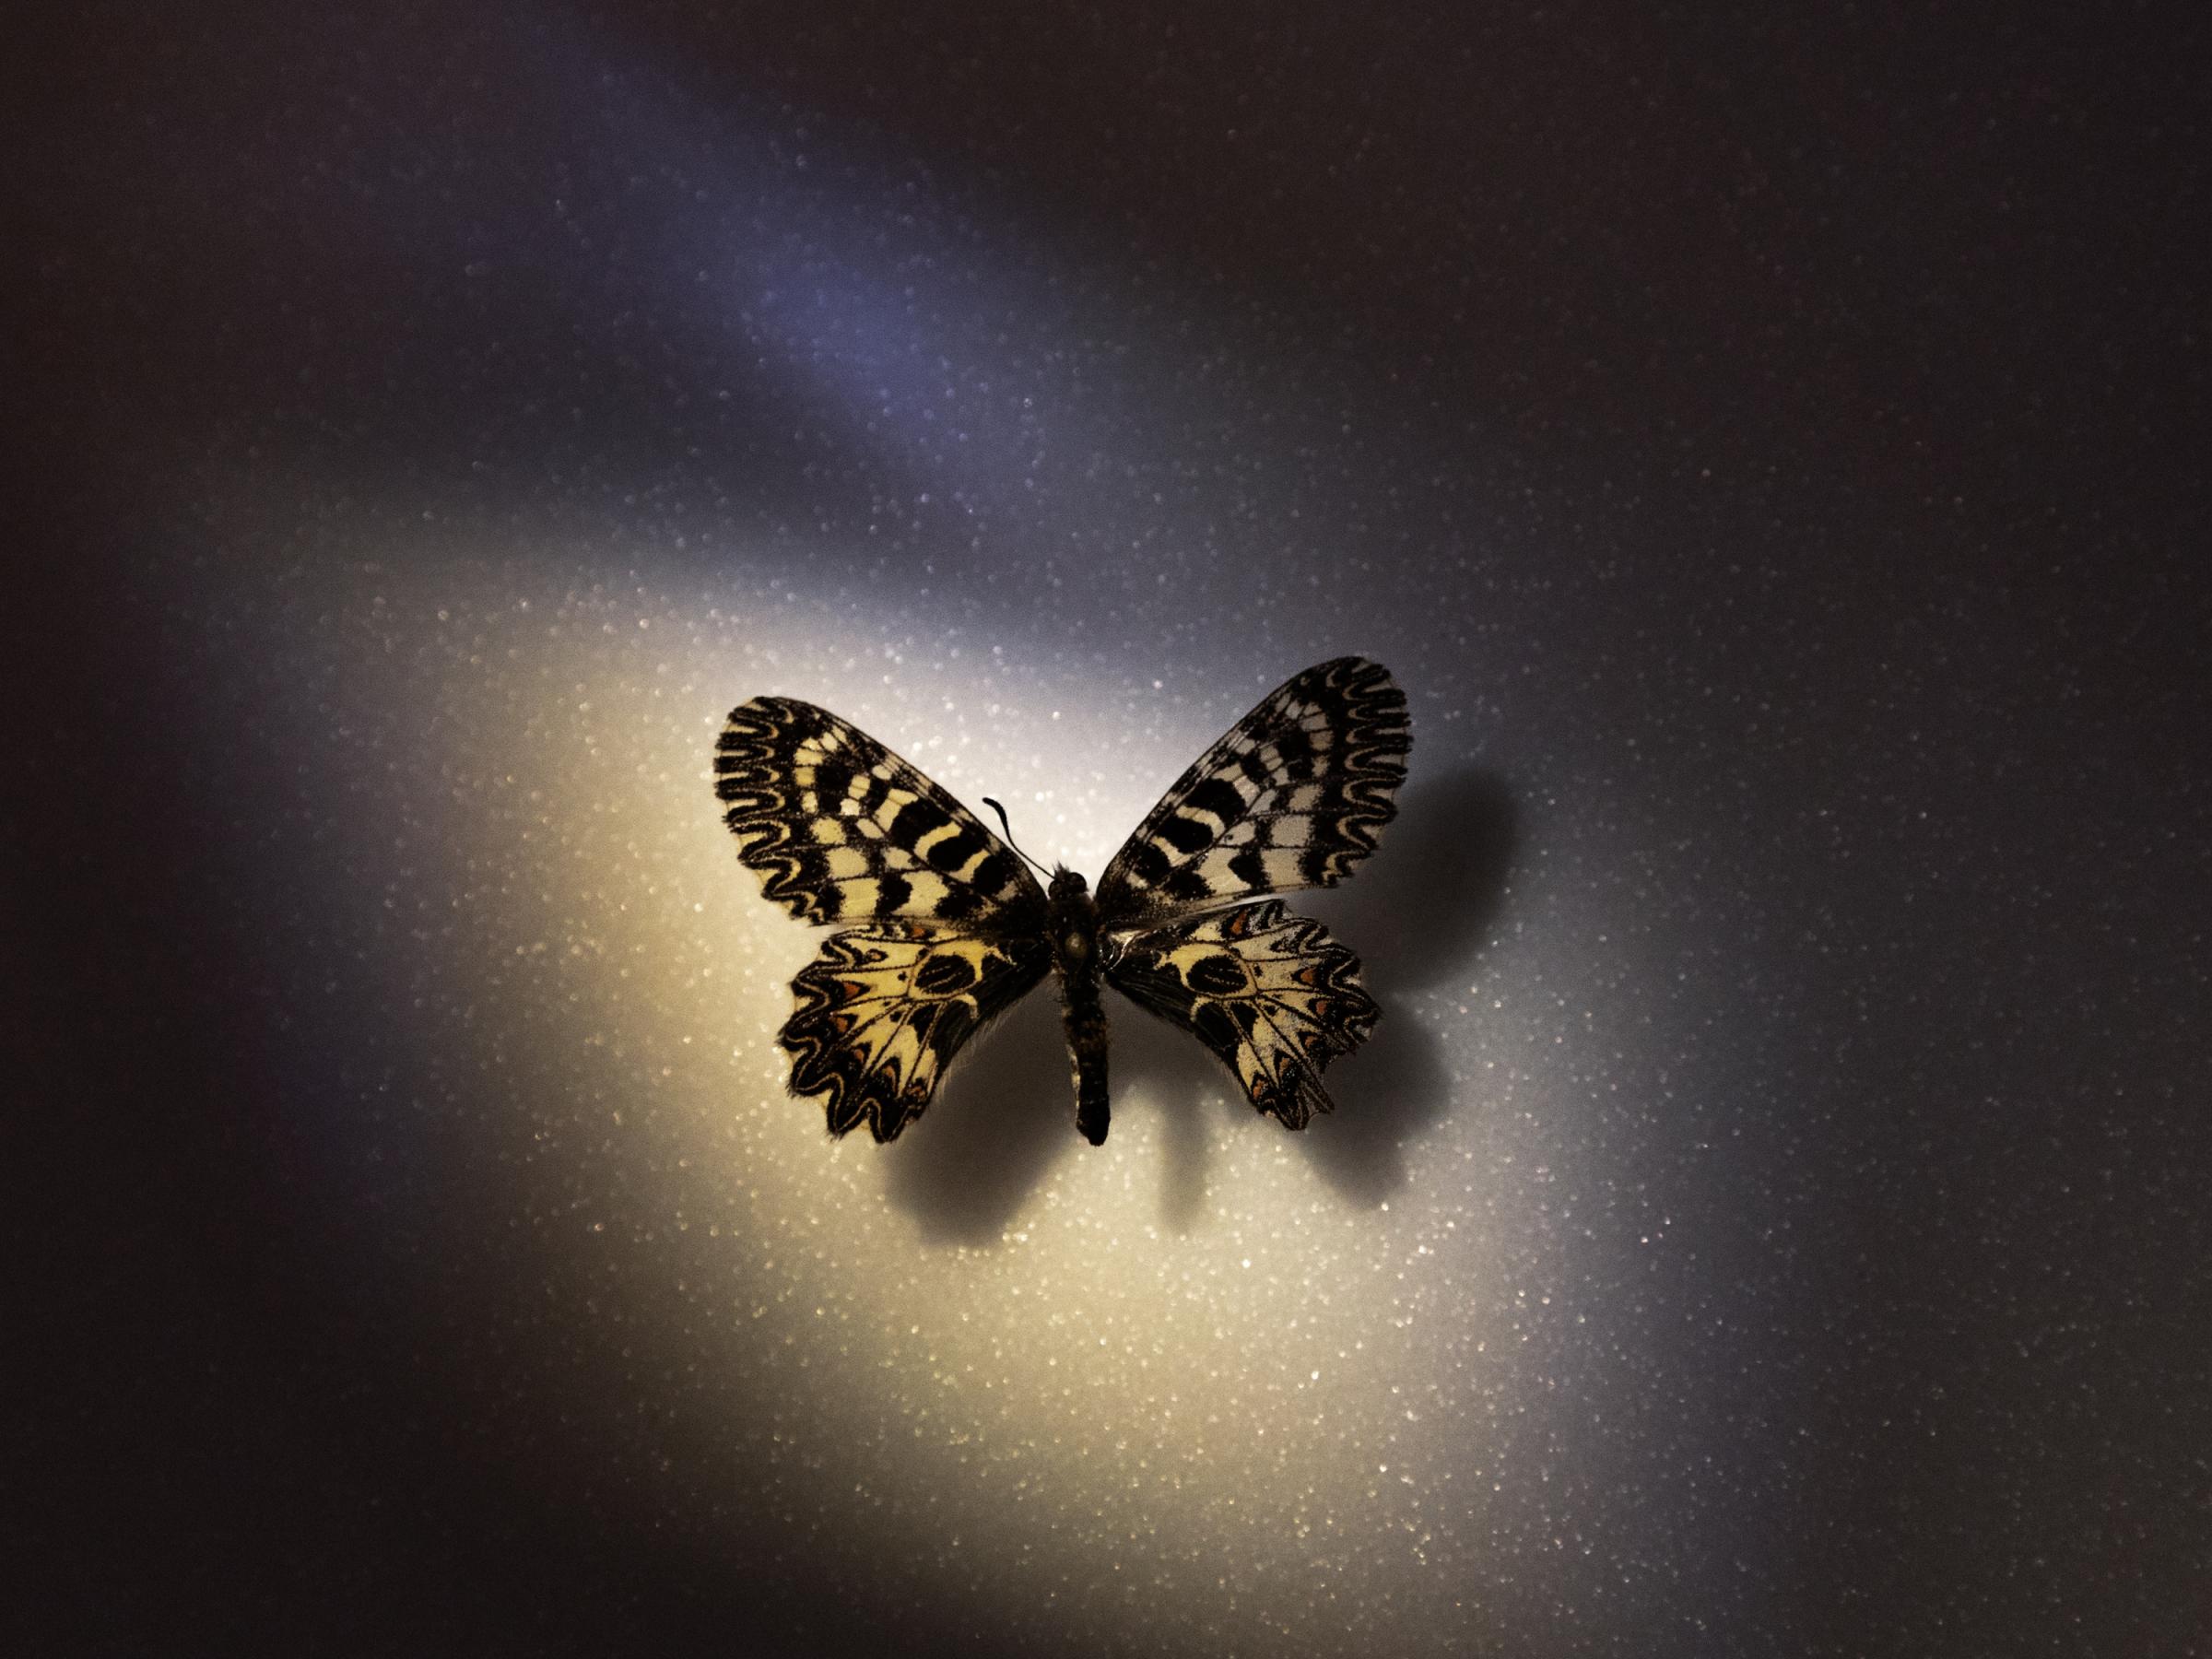 We are still dreaming  - A specimen of the butterfly Zerynthia polyxena Geyer,...